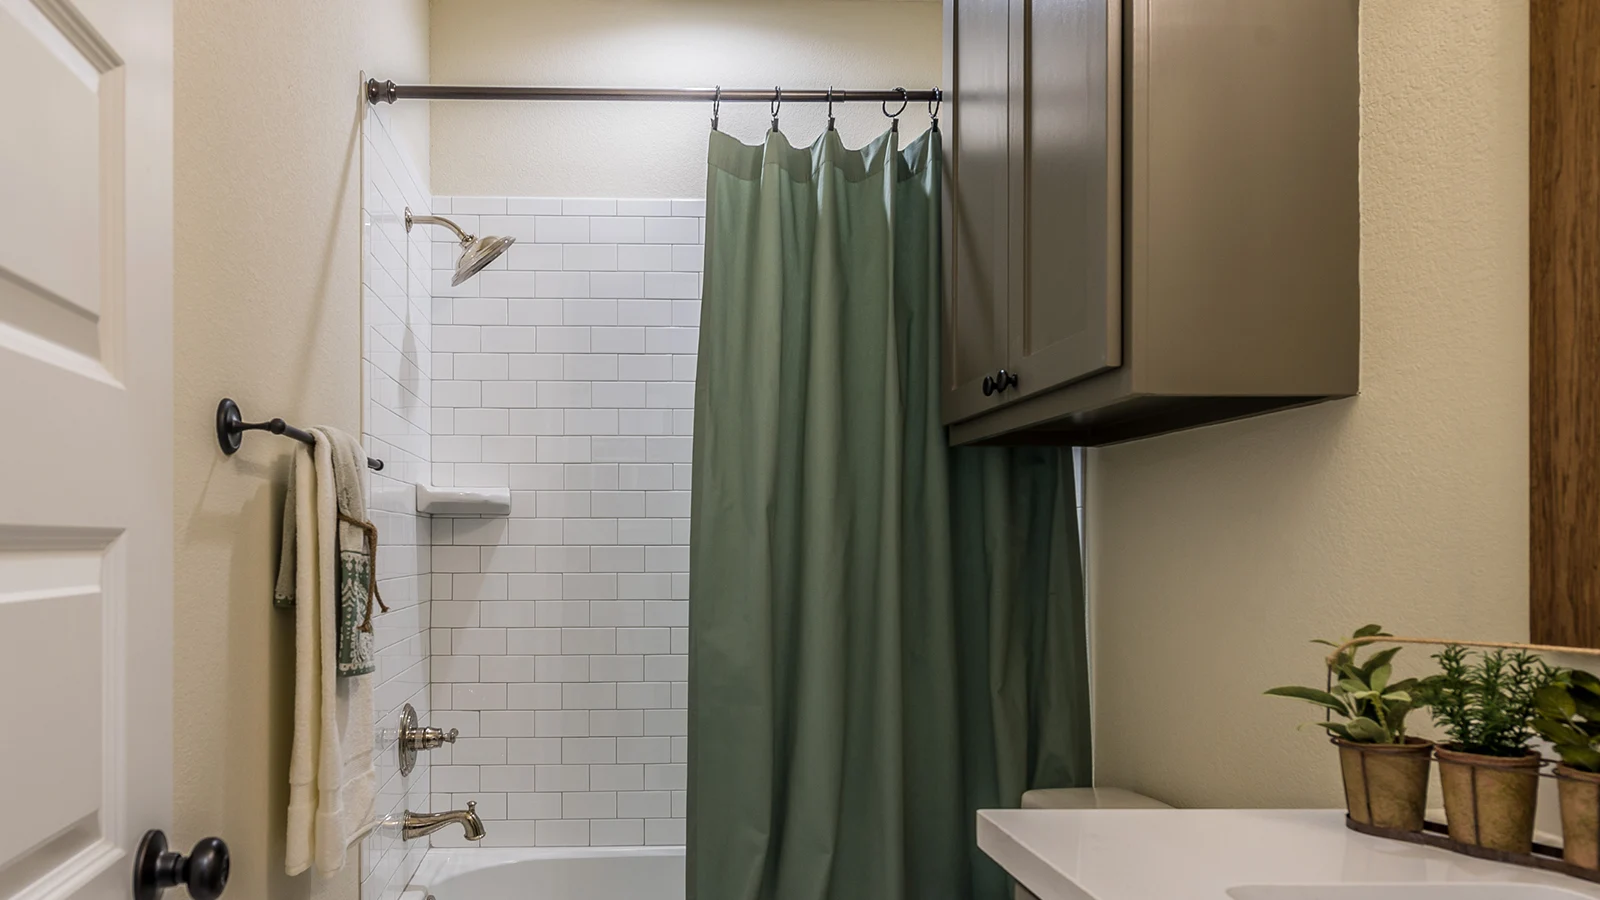 Types of Shower Curtain Hooks: A bathroom with a green shower curtain.